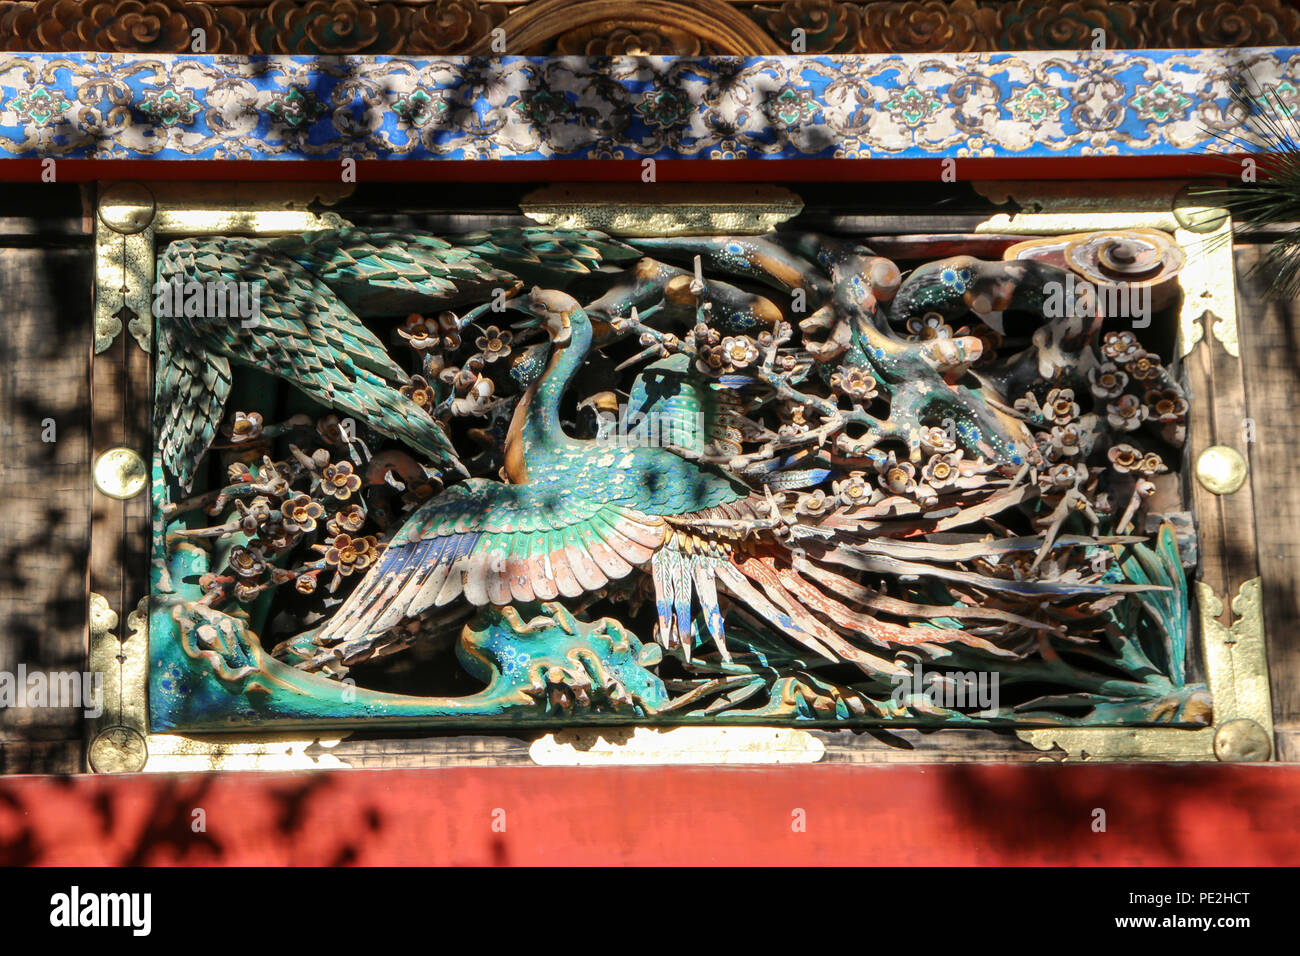 Elaborate paradise bird carving found at the gallery of the Tōshō-gū Shinto shrine located in Nikkō, Tochigi Prefecture, Japan. Stock Photo